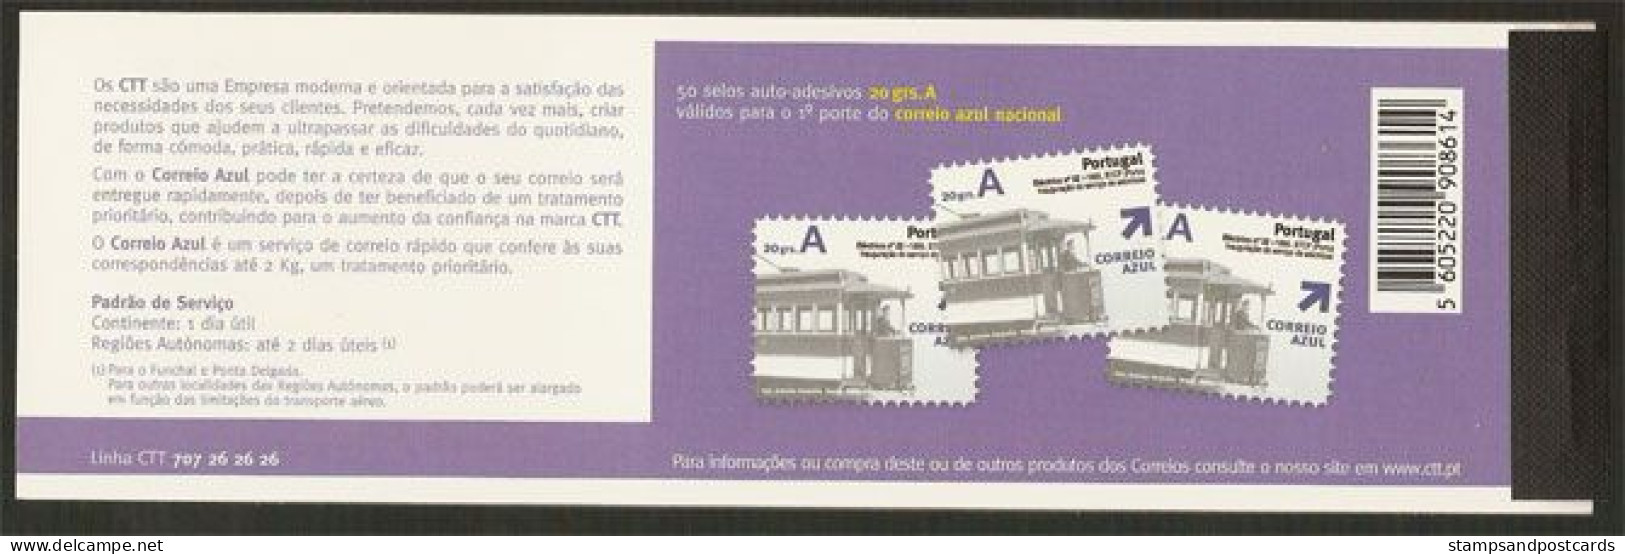 Portugal Carnet Autocollant 2007 Tram 1895 Oporto 50 Timbres 2007 Sticker Stamp Booklet Oporto Tramway 50 Stamps *** - Tranvías